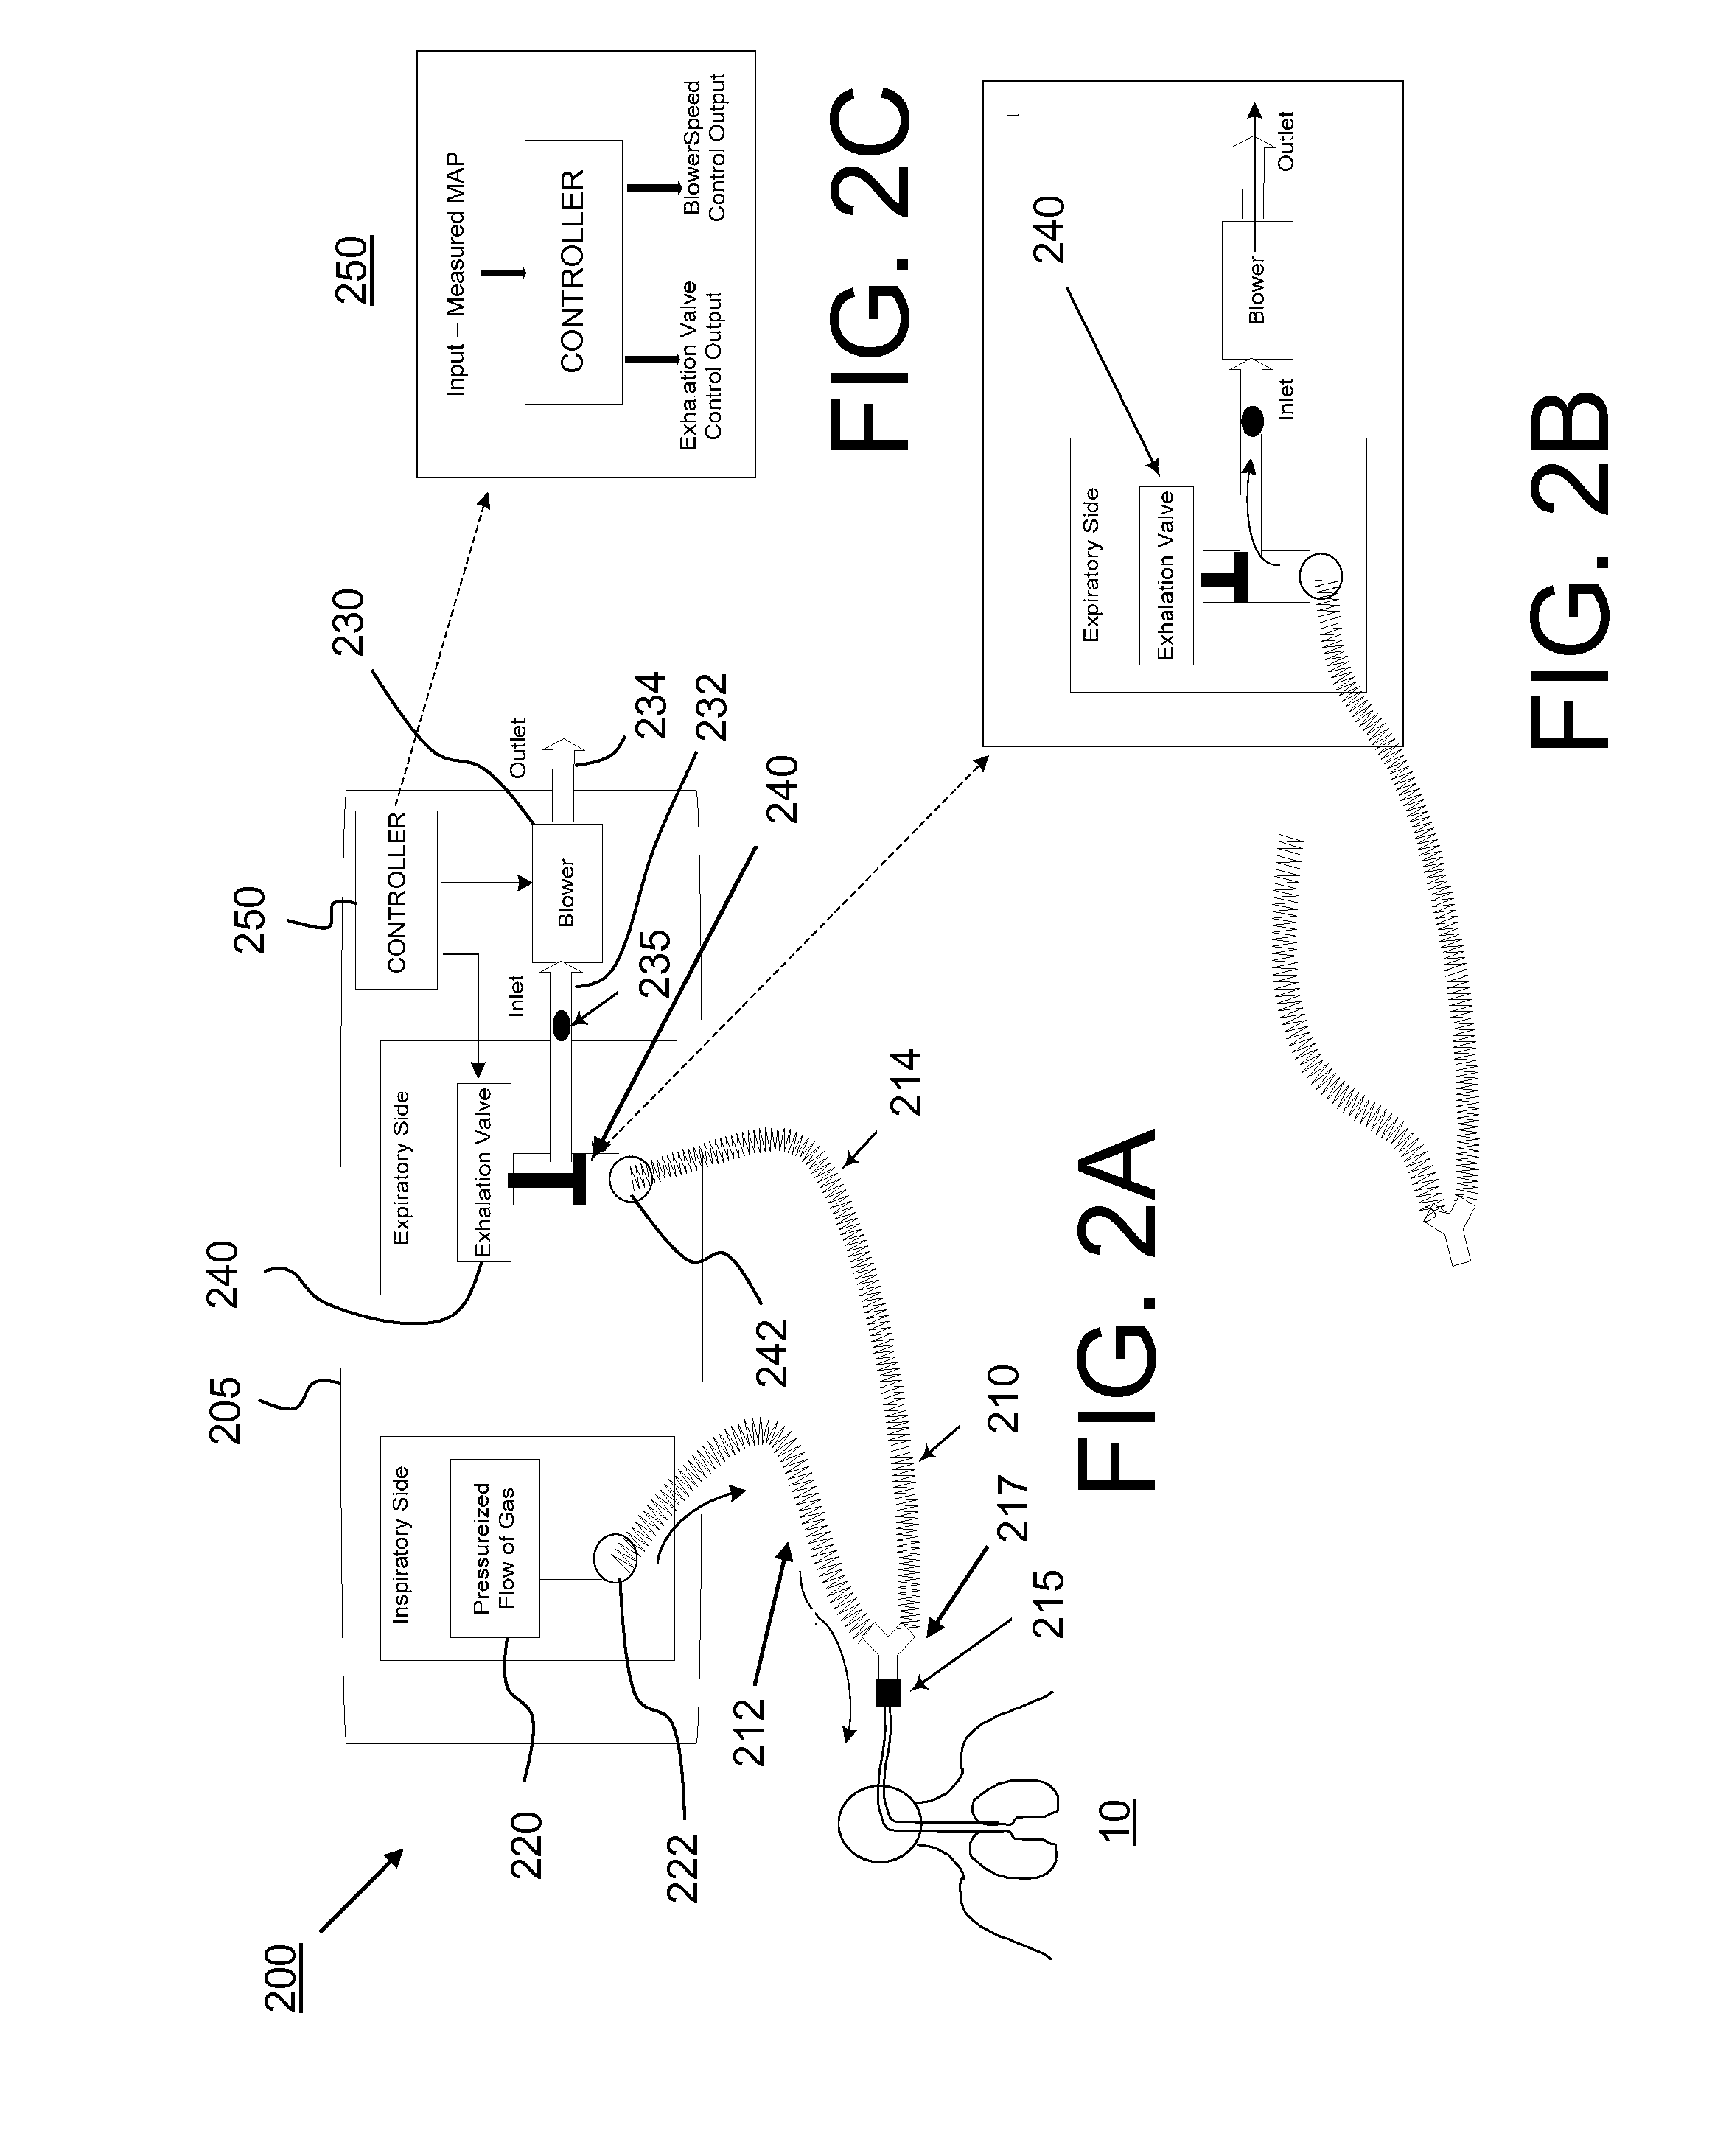 Ventilator with integrated blower to provide negative or positive pressure in a ventilator system